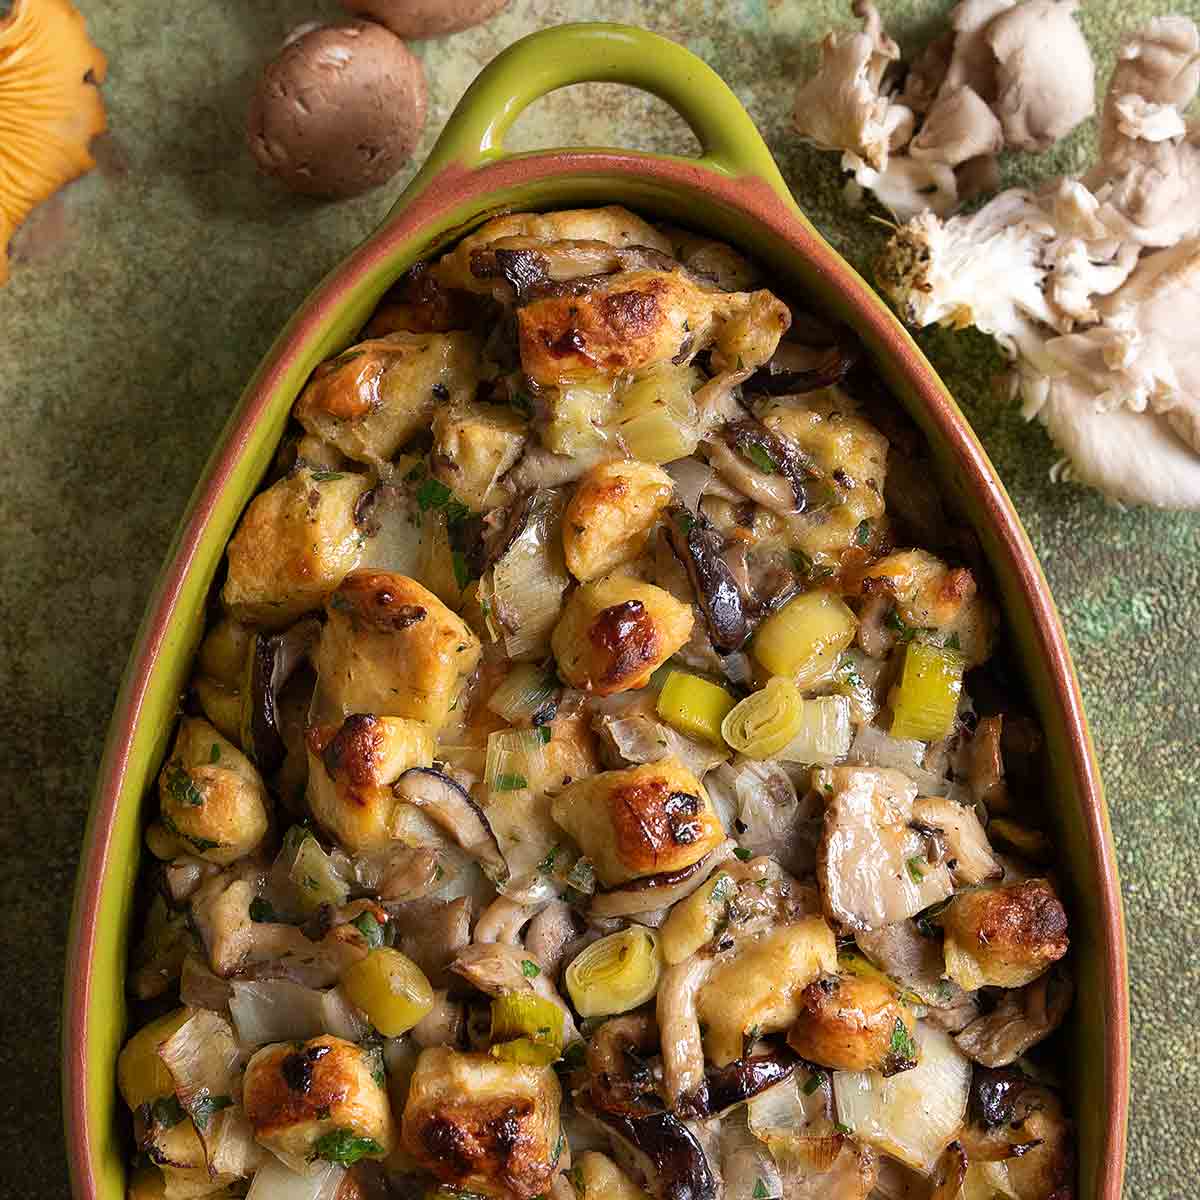 An oval casserole dish filled with wild mushroom stuffing.